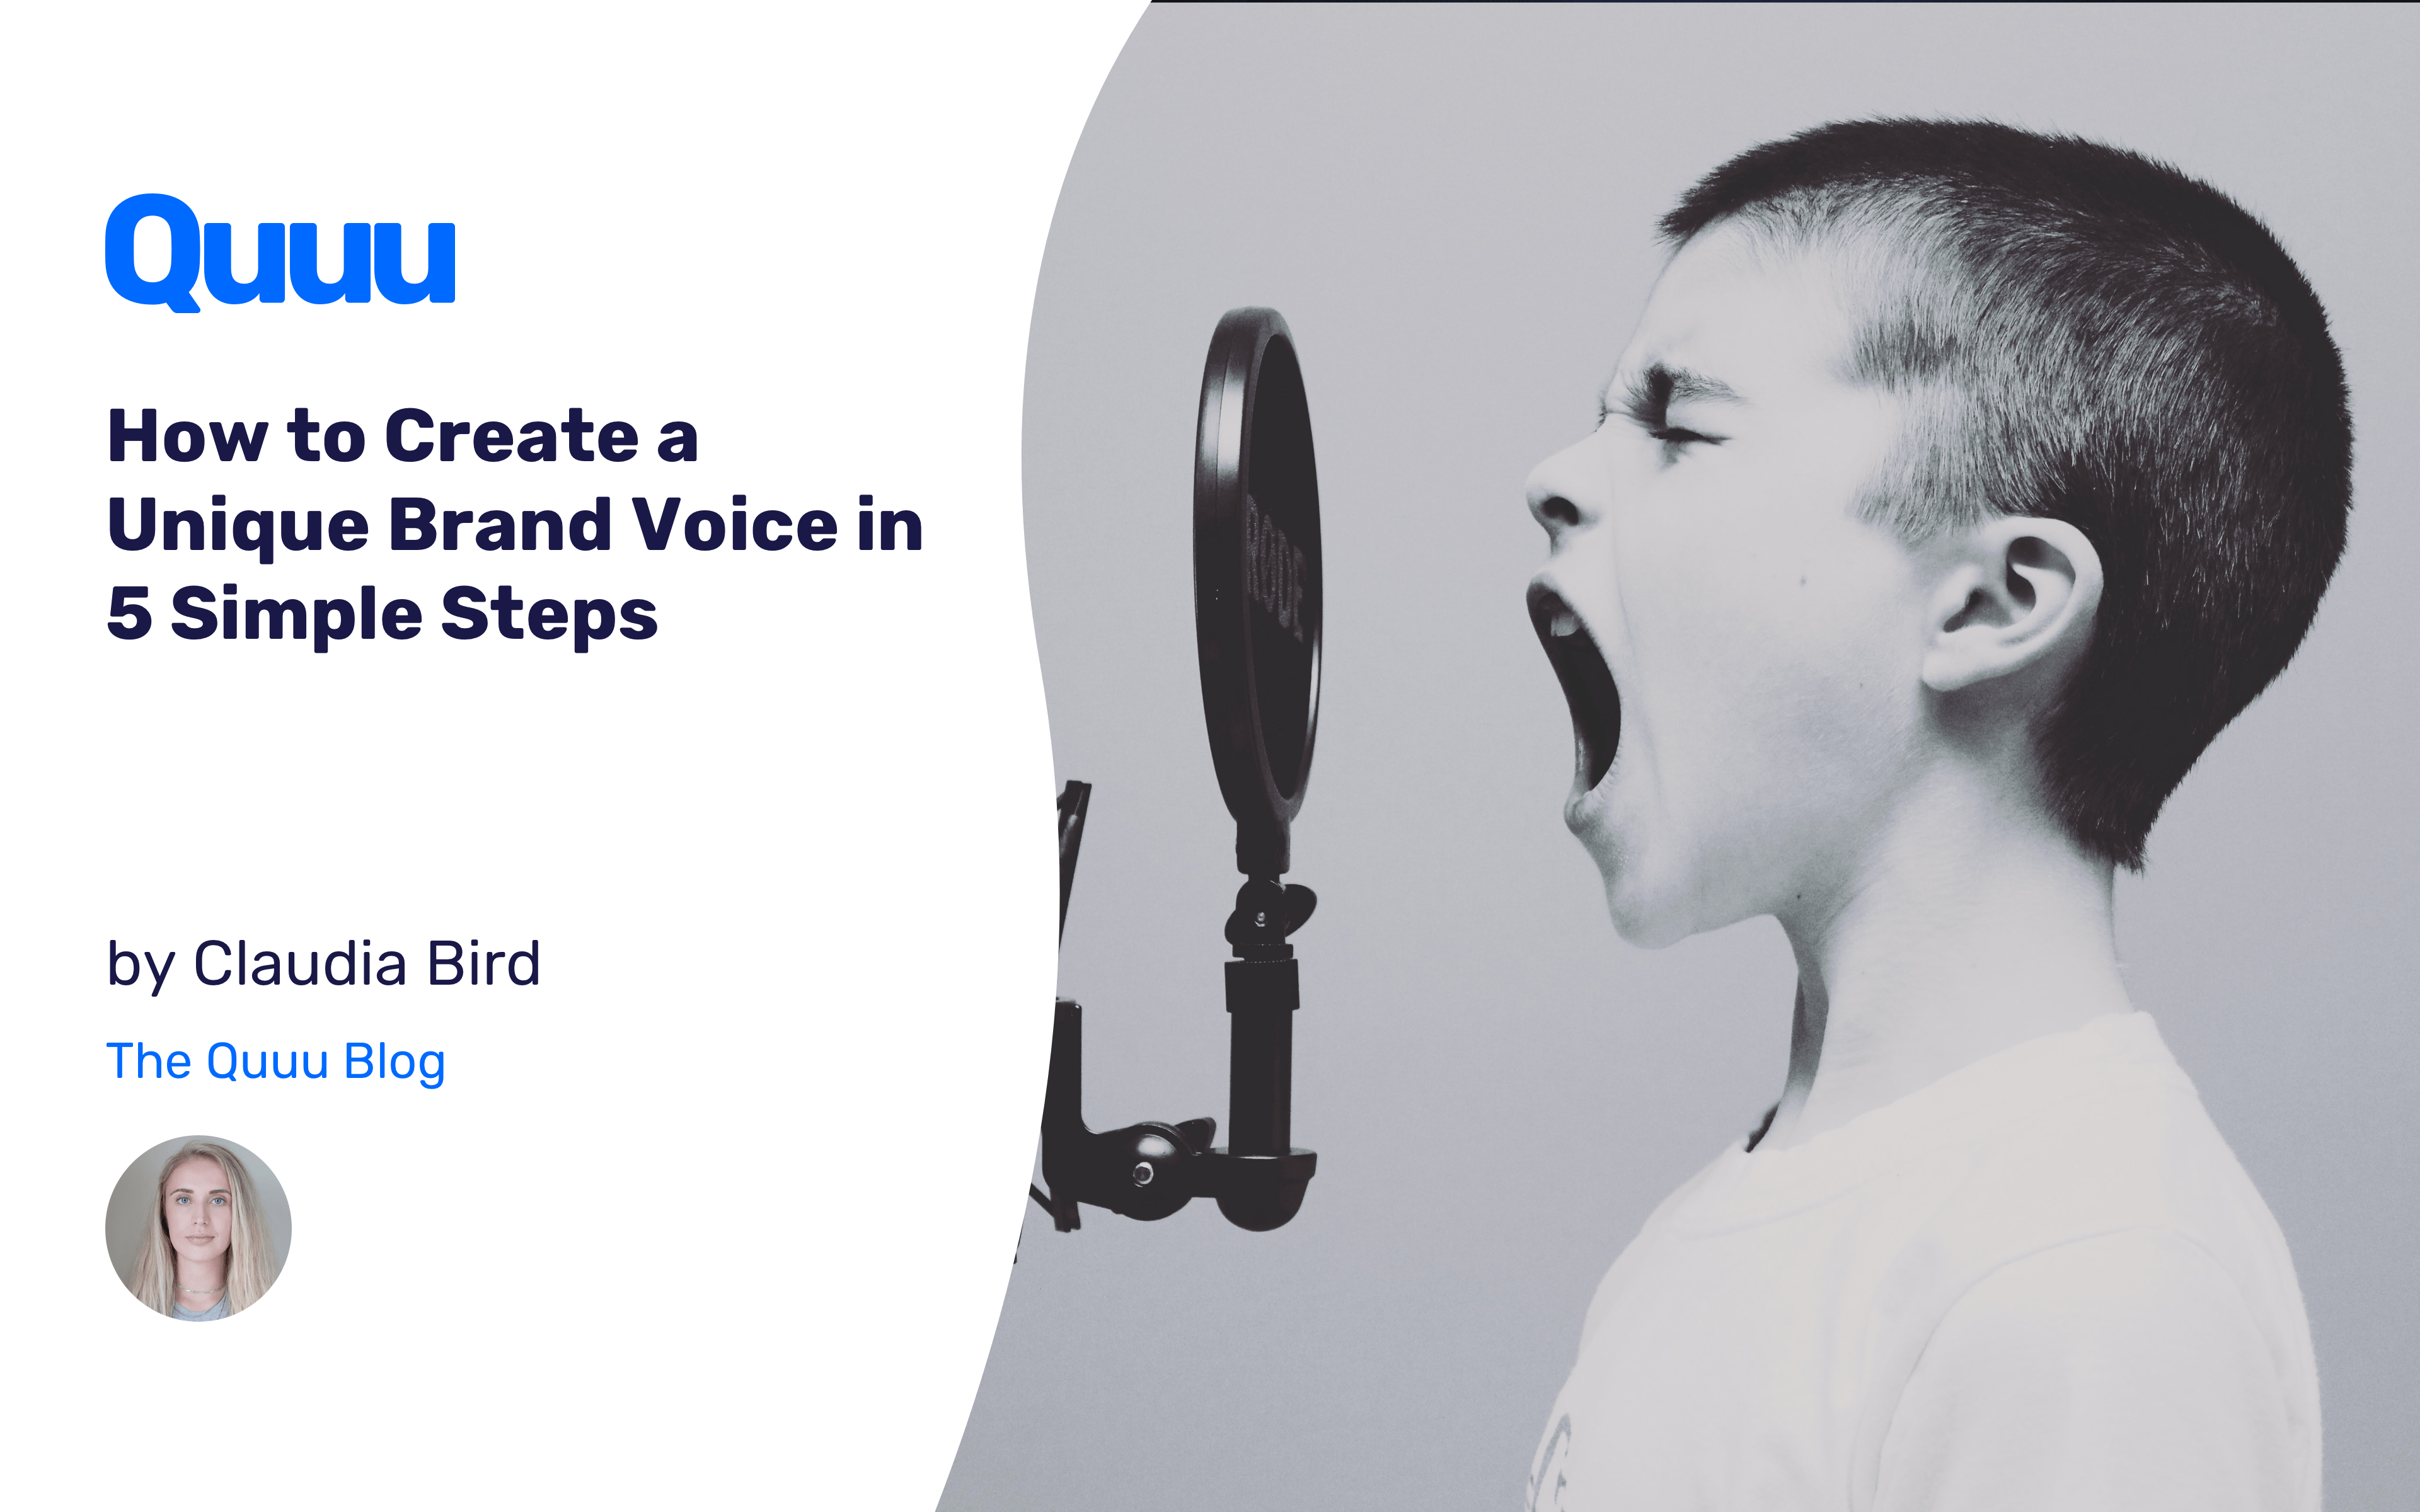 How to Create a Unique Brand Voice in 5 Simple Steps